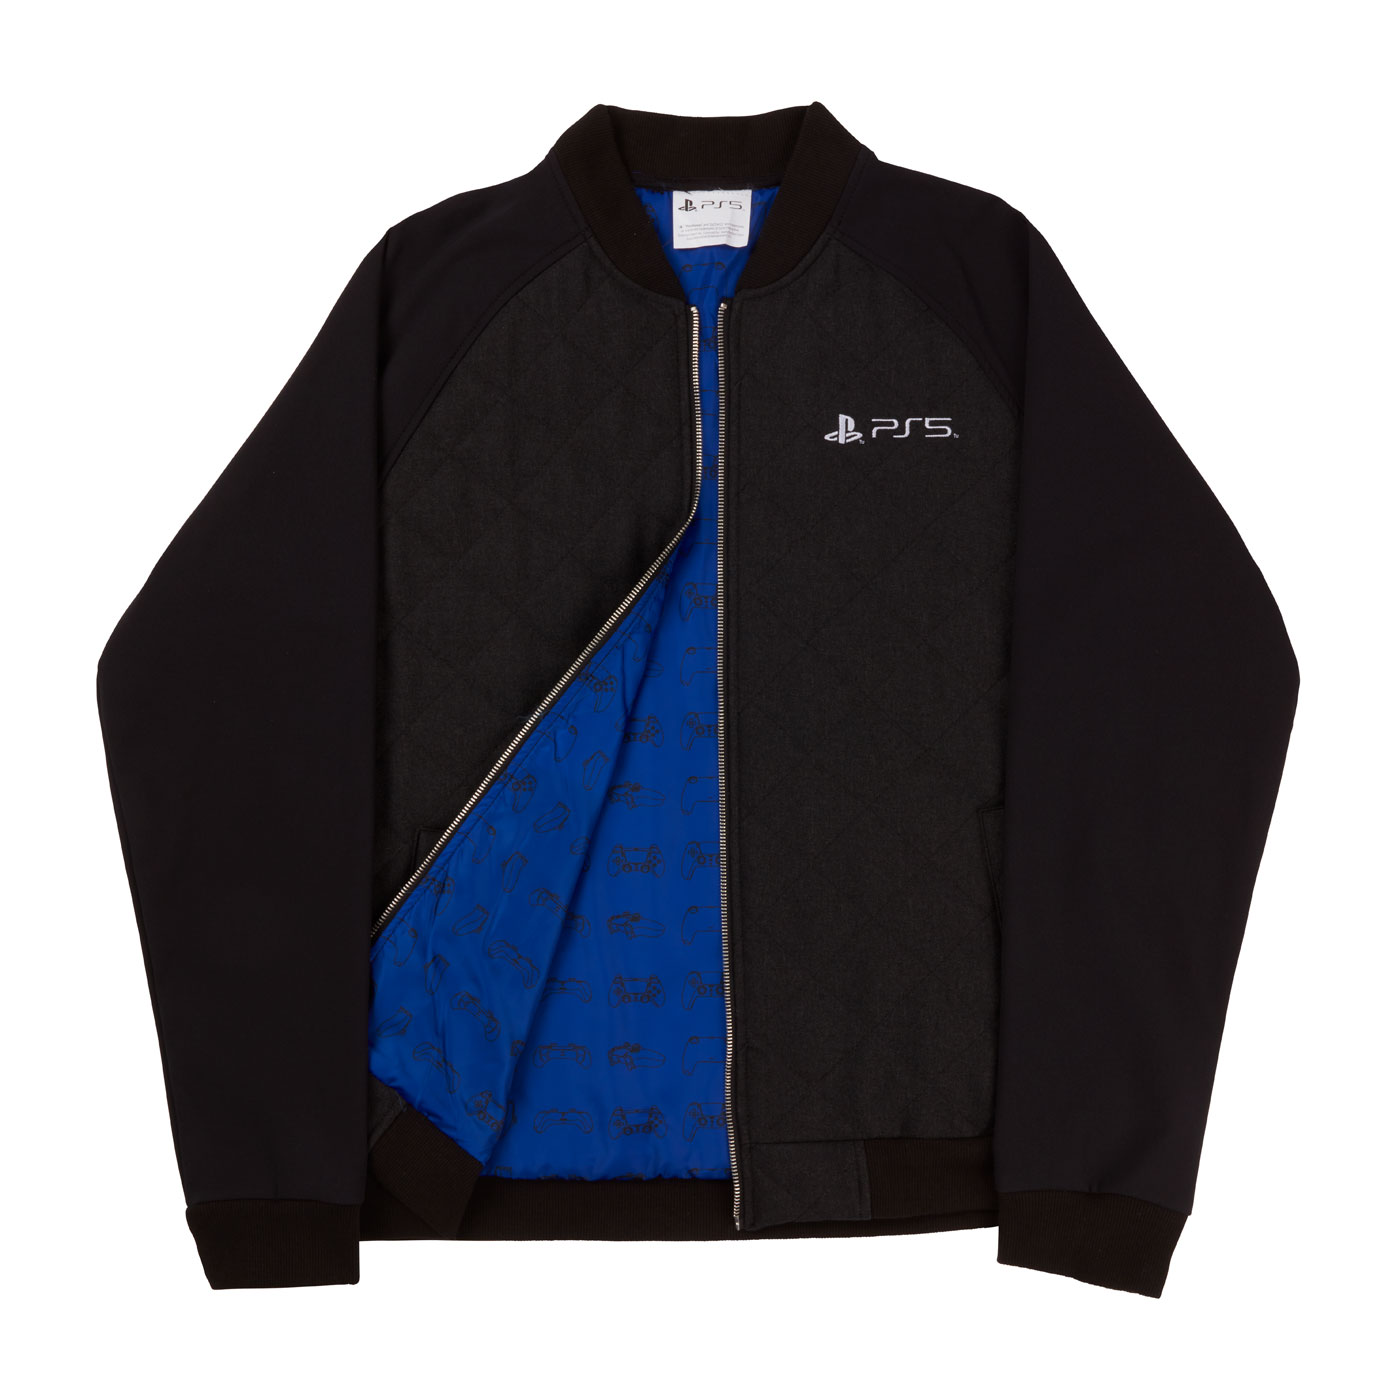 PS5™ inspired Quilted Bomber Jacket | PlayStation Gear